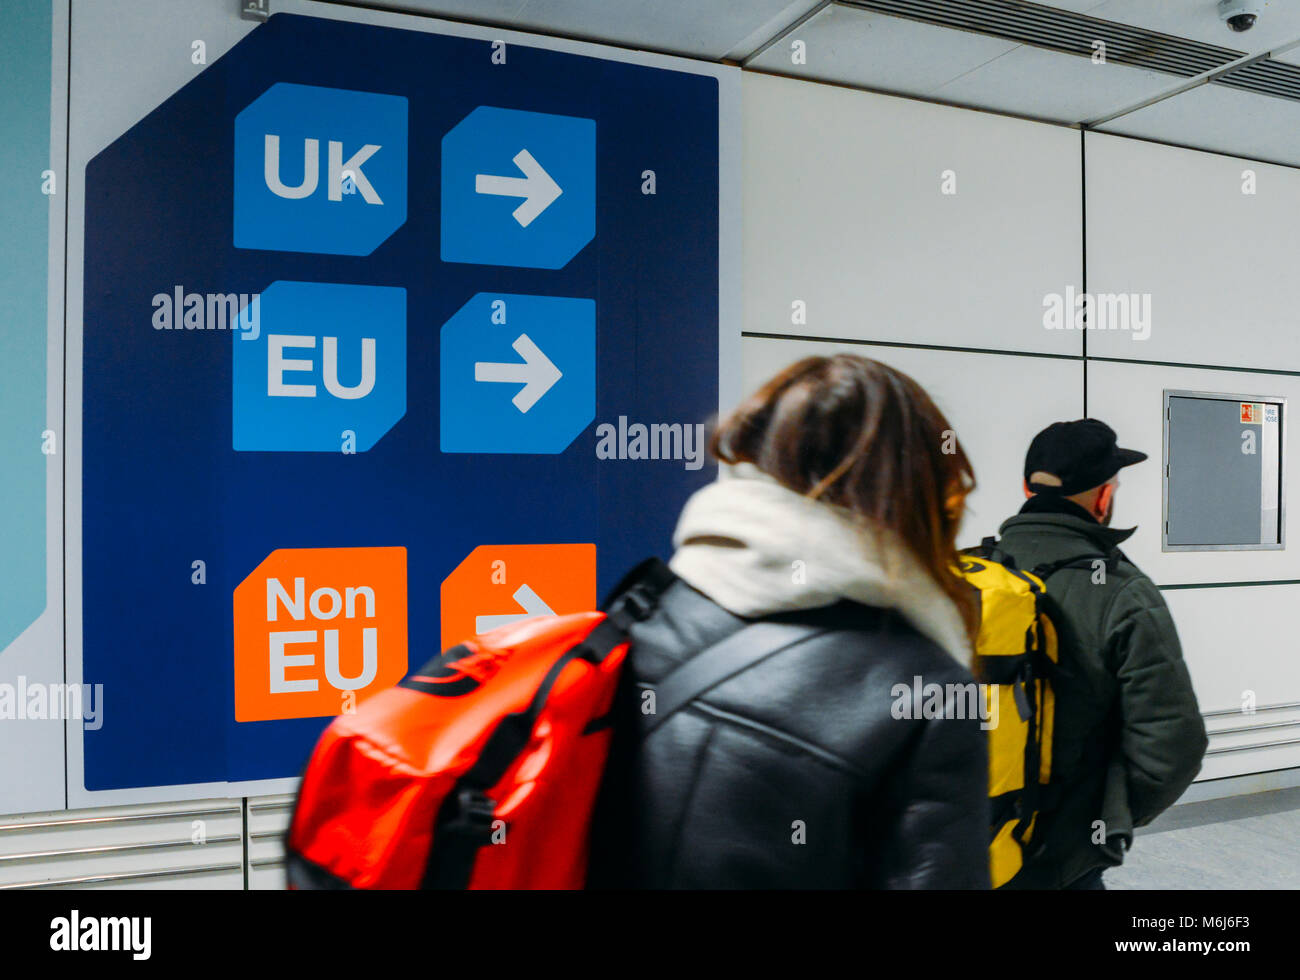 Passengers walks past sign prior to immigration control pass a si Stock Photo